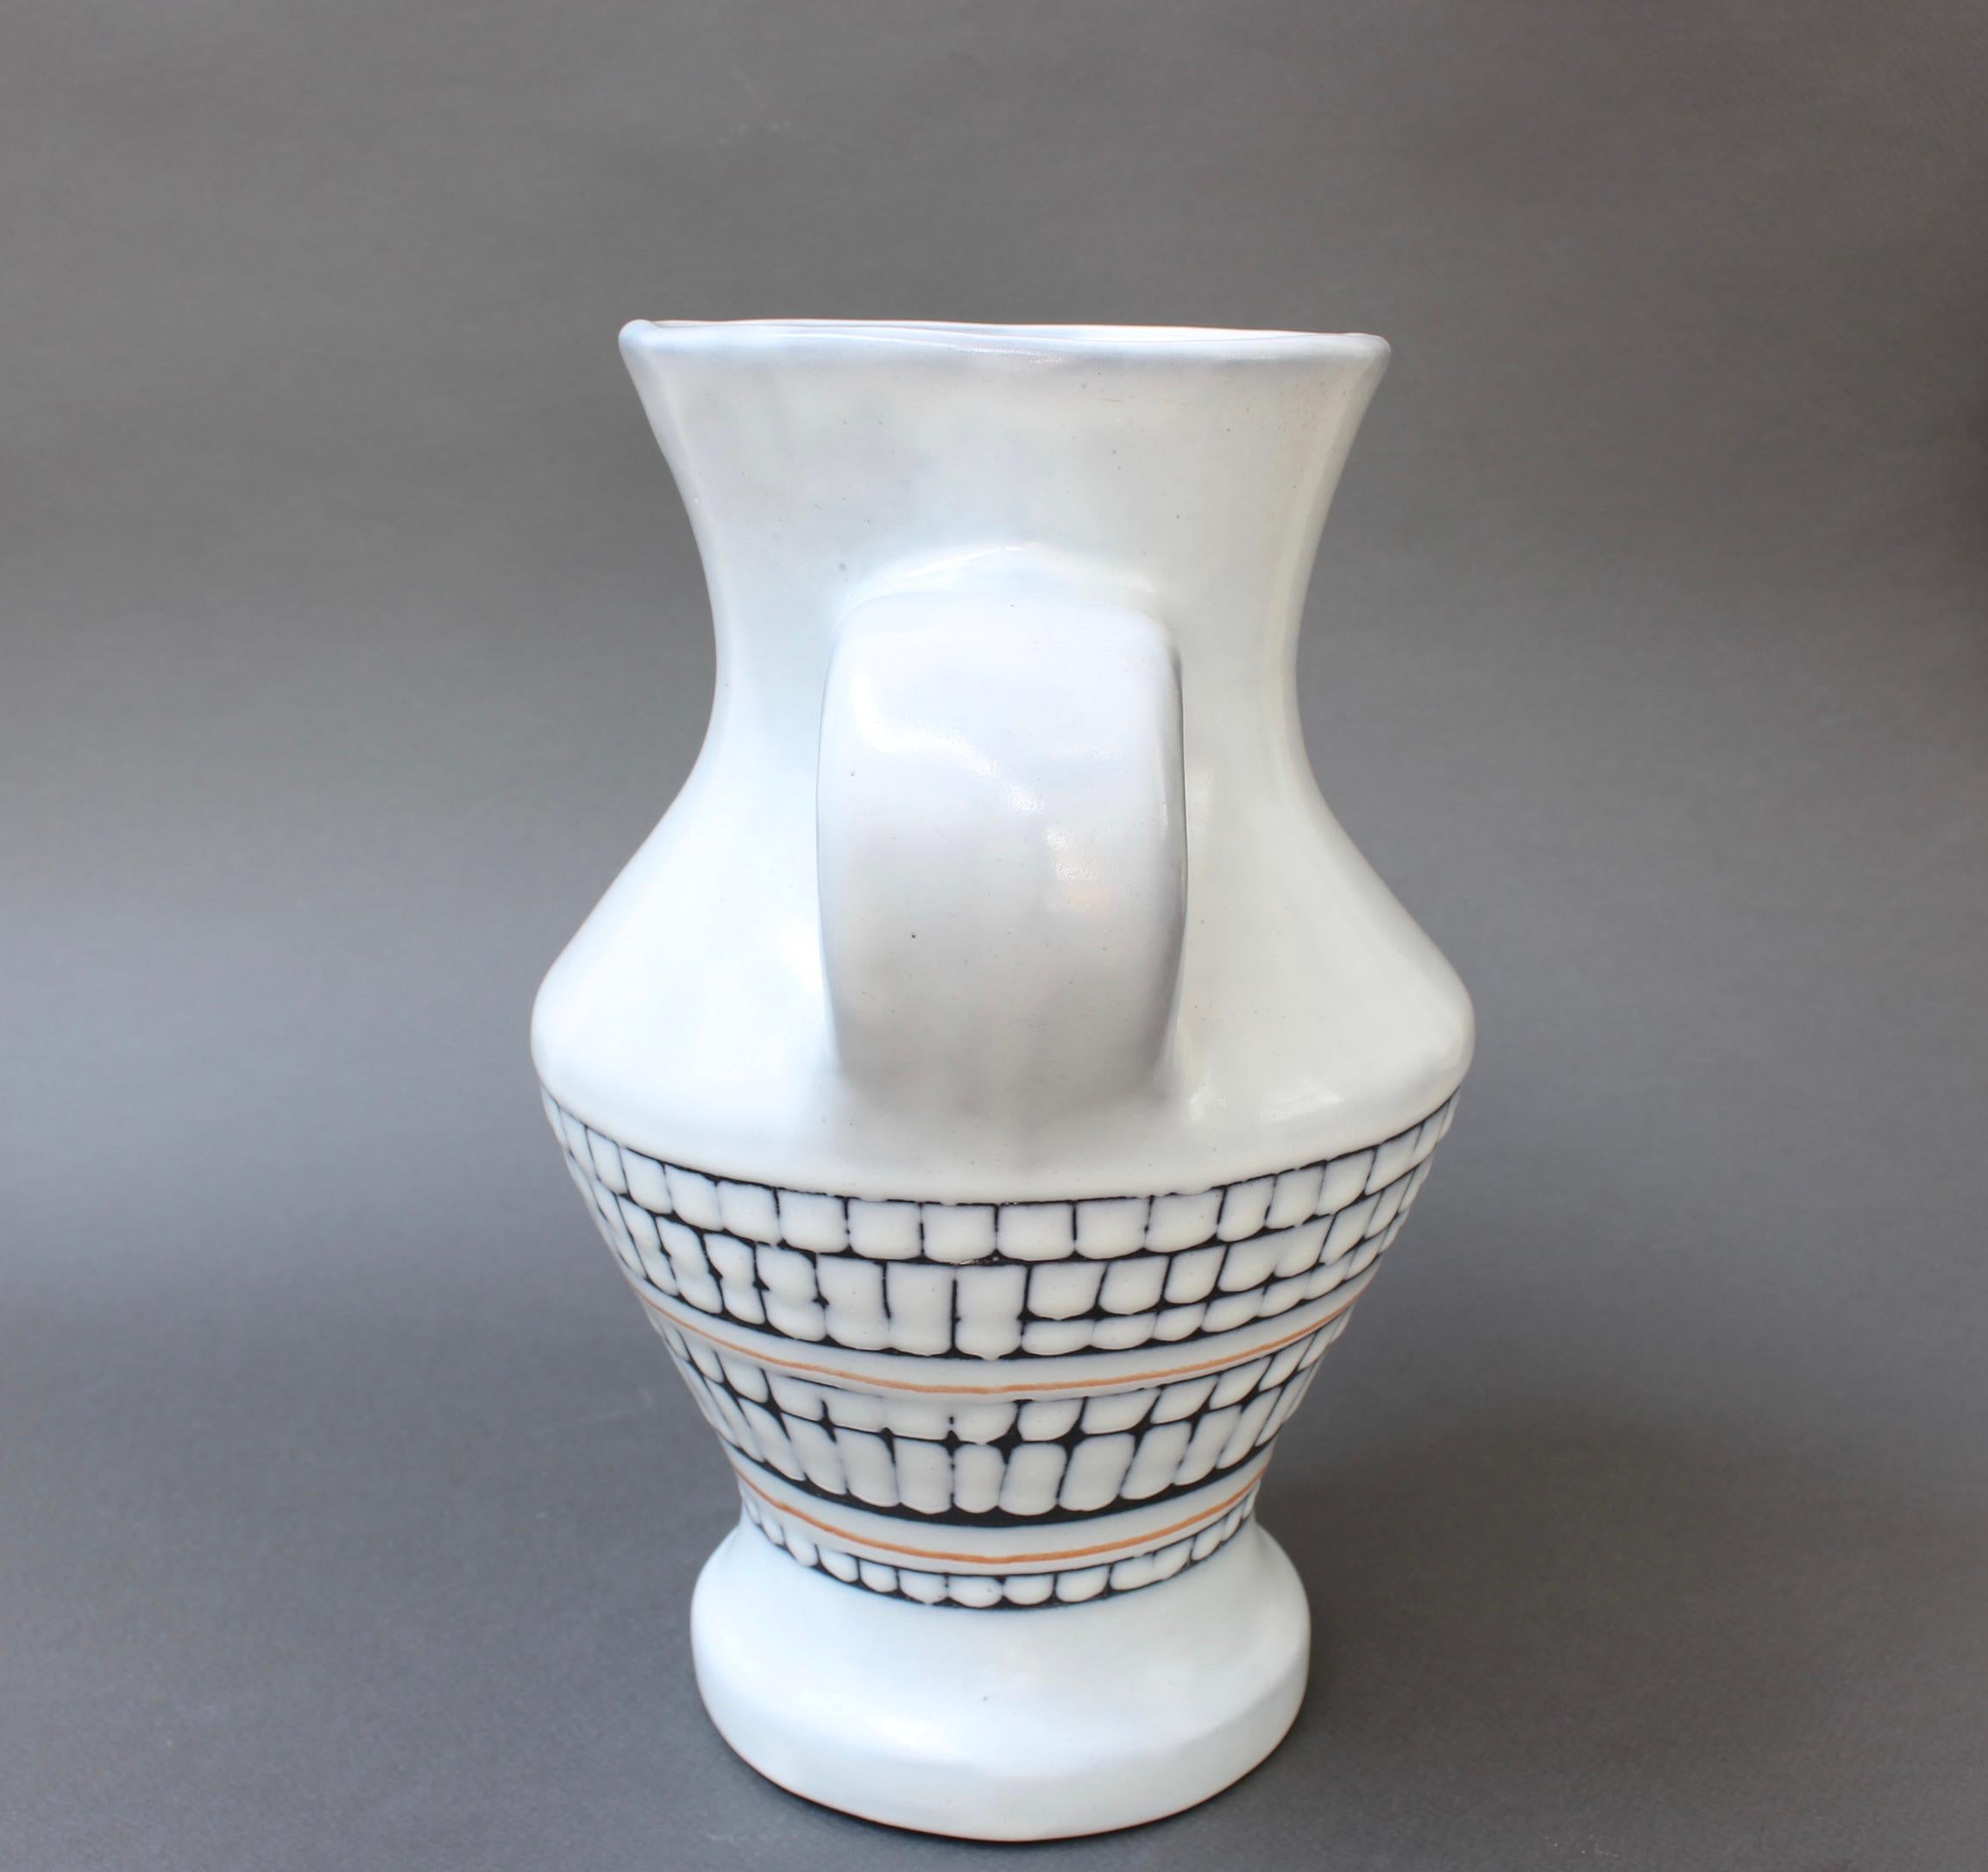 Vintage French Ceramic Vase with Handles by Roger Capron, 'circa 1950s' For Sale 3